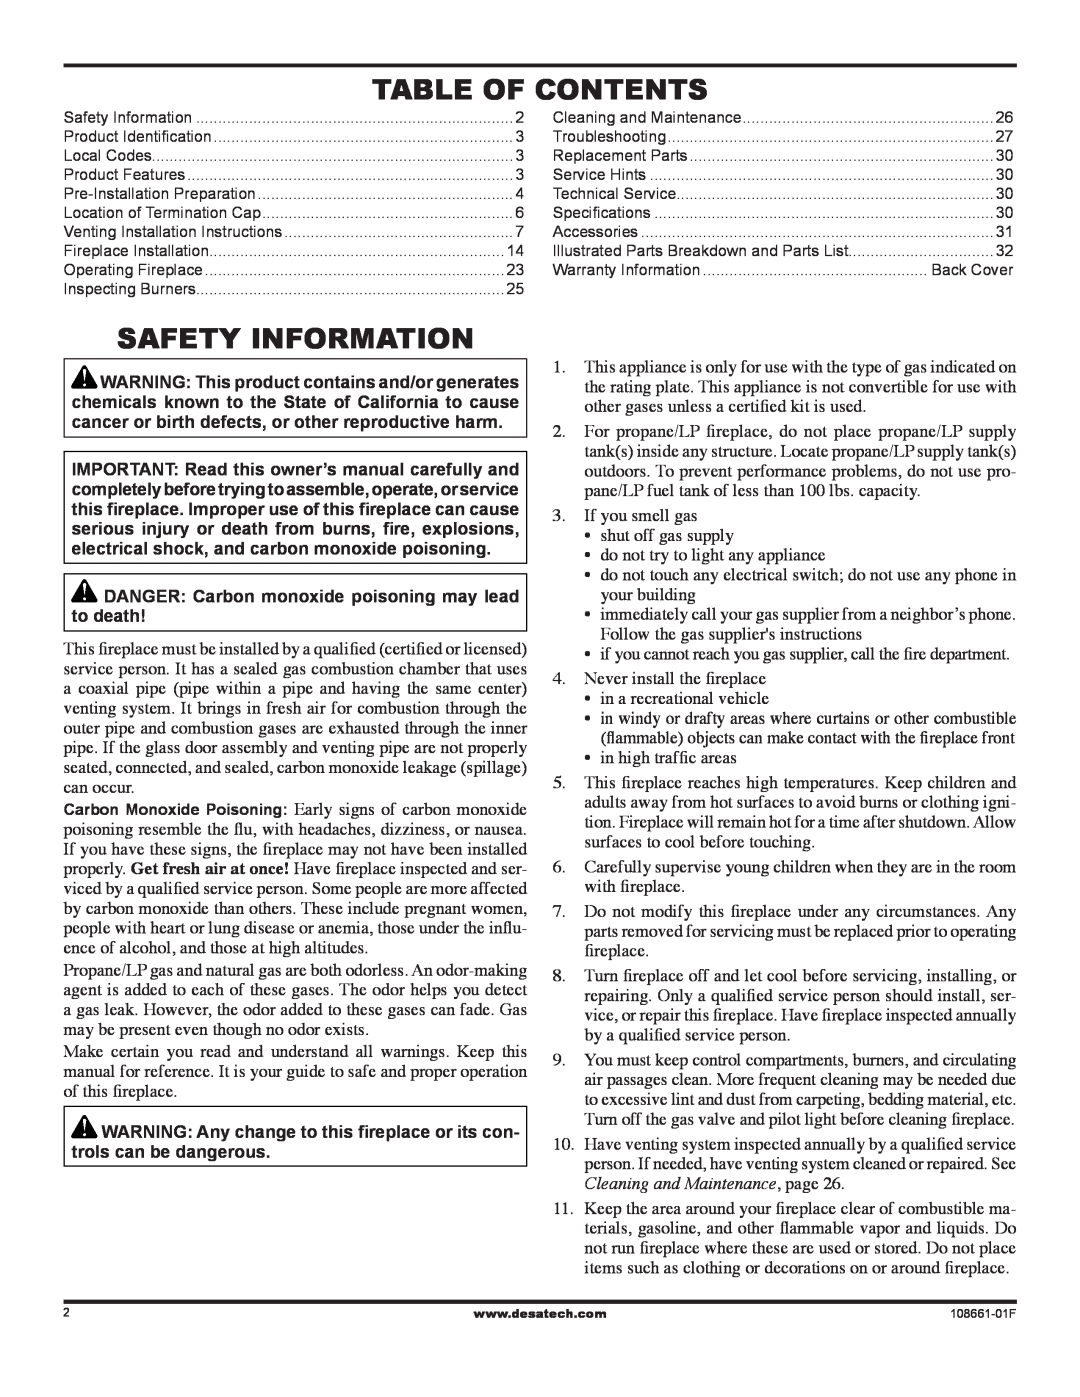 Desa CHDV32NR, (V)T32P, (V)T36P SERIES Table of Contents, Safety Information, Cleaning and Maintenance, page 